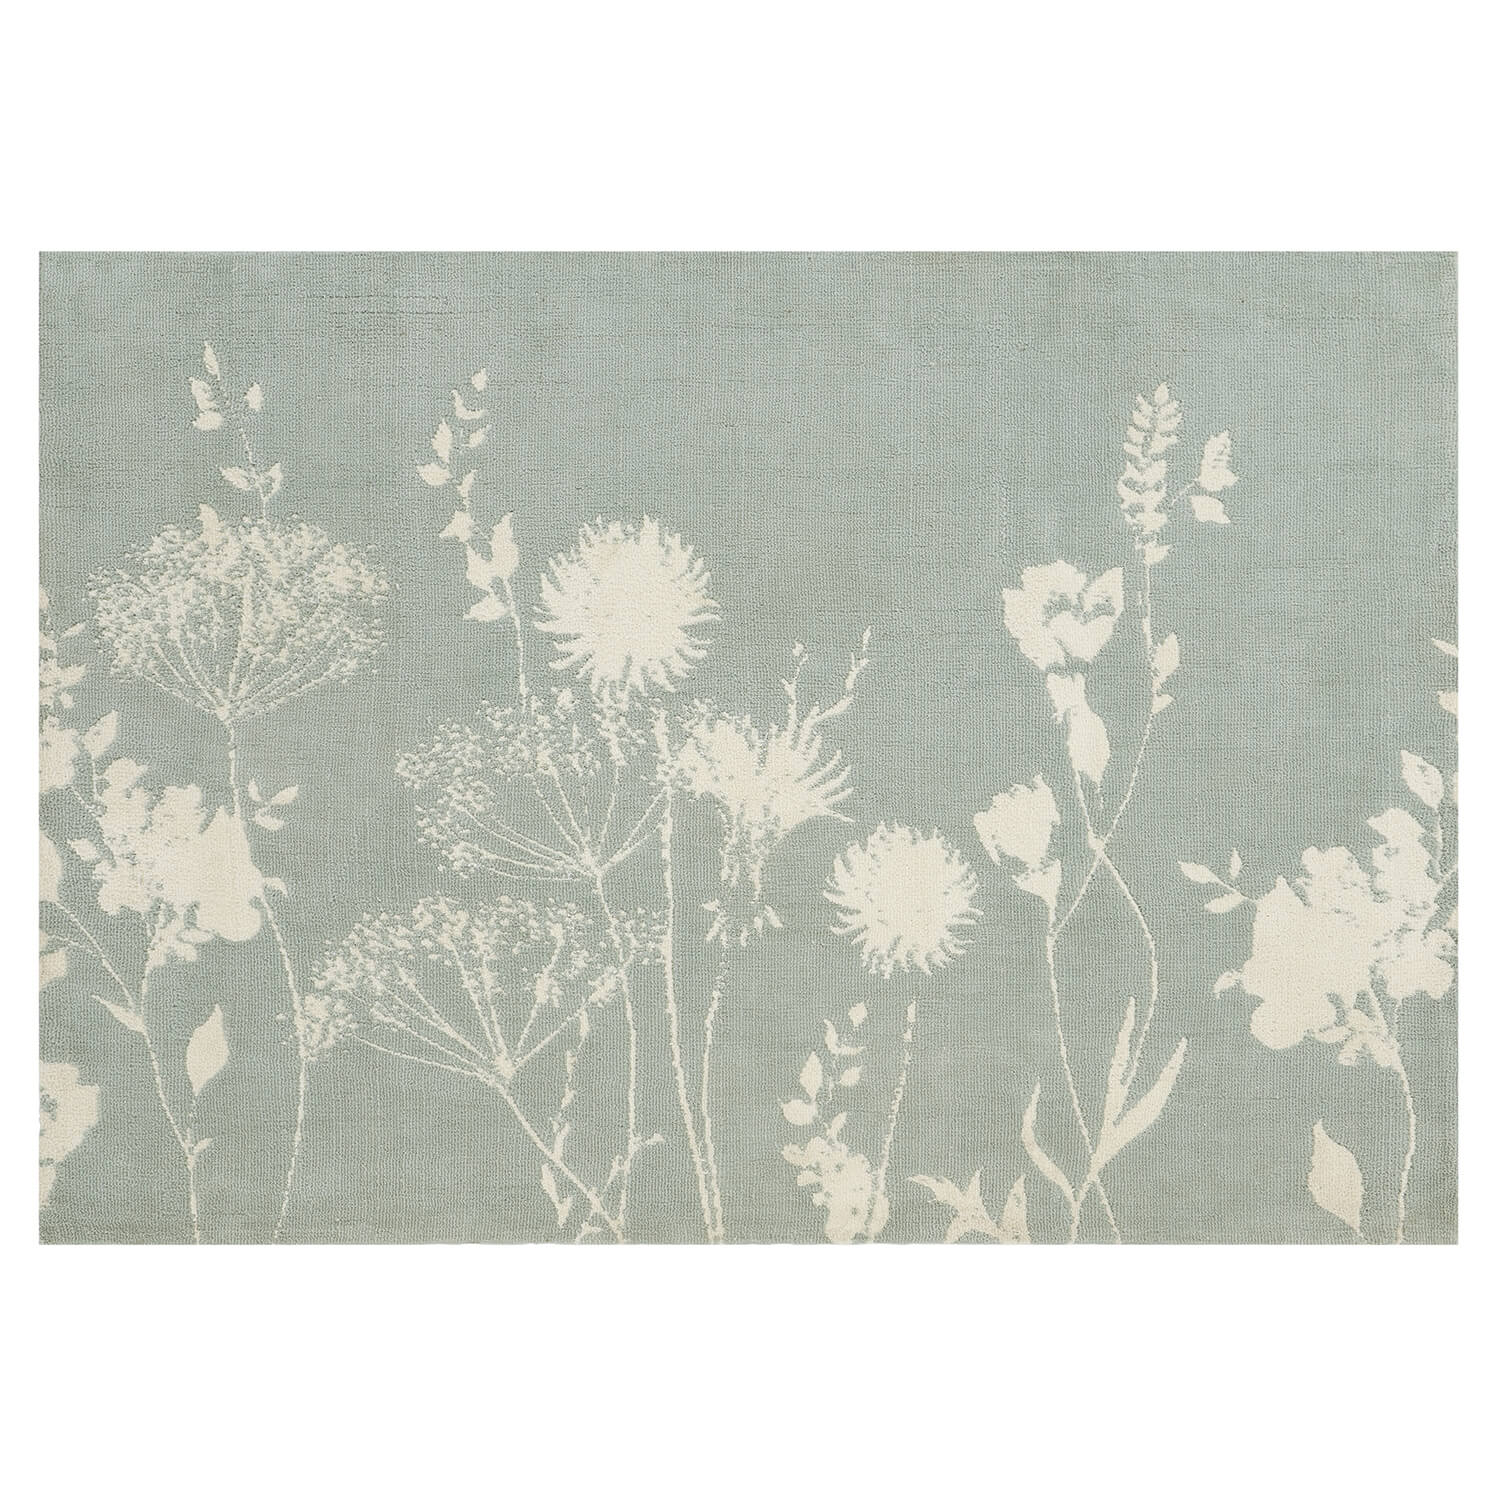 Catherine Lansfield Meadowsweet Floral Rug - Green 6 Shaws Department Stores